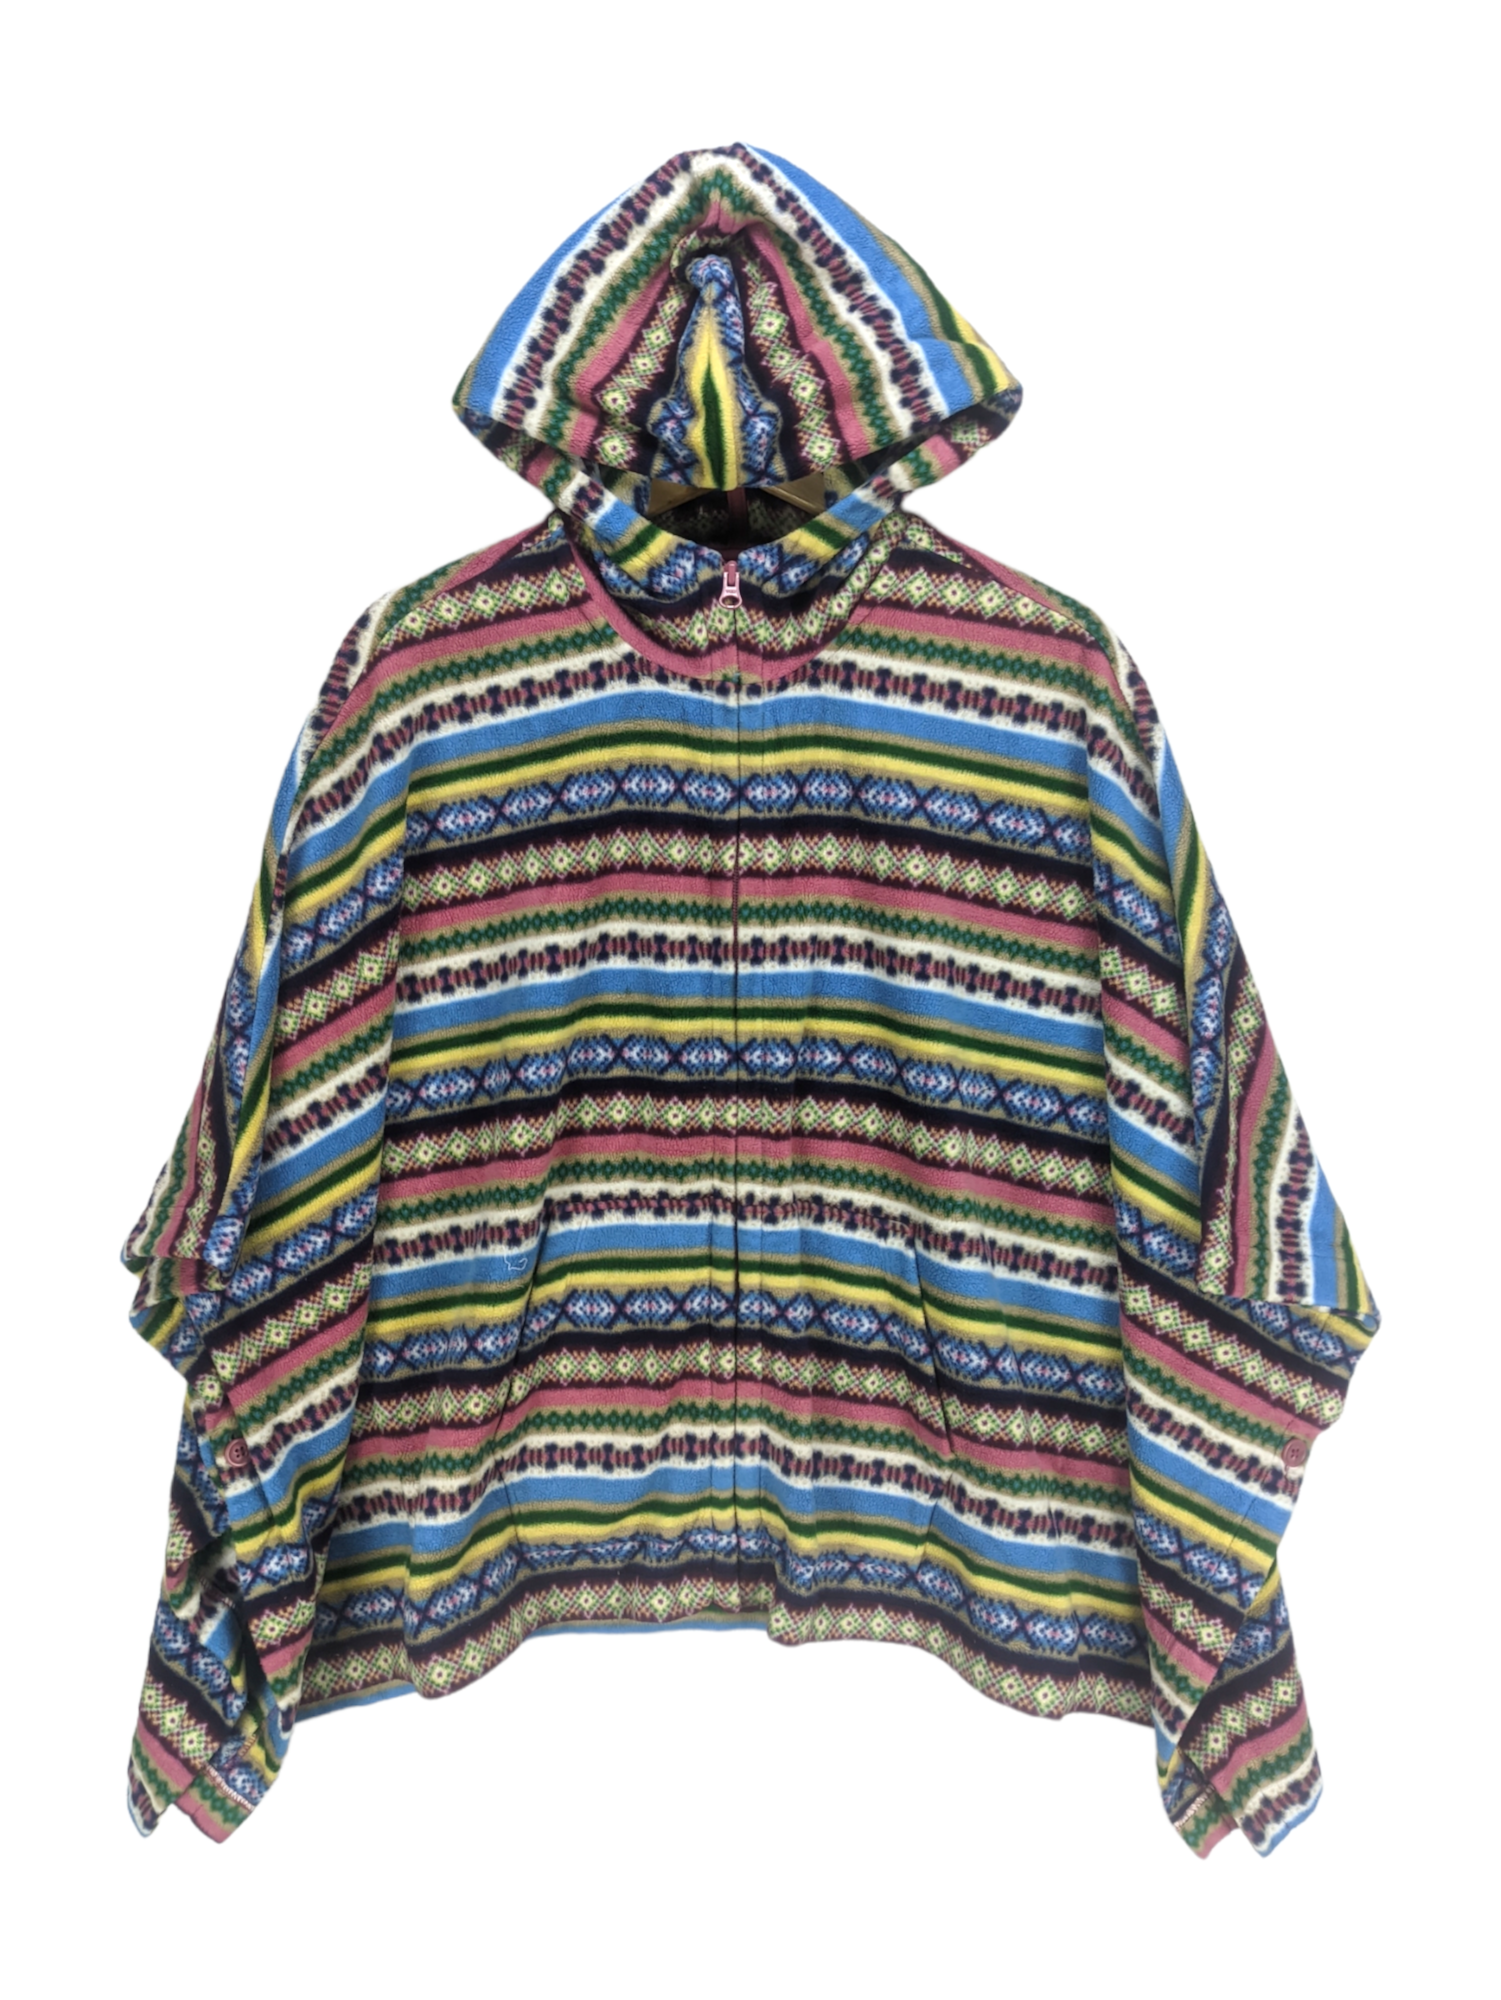 Uniqlo - Steals🔥Uniqlo Poncho Hooded Navajo Patterned - 1